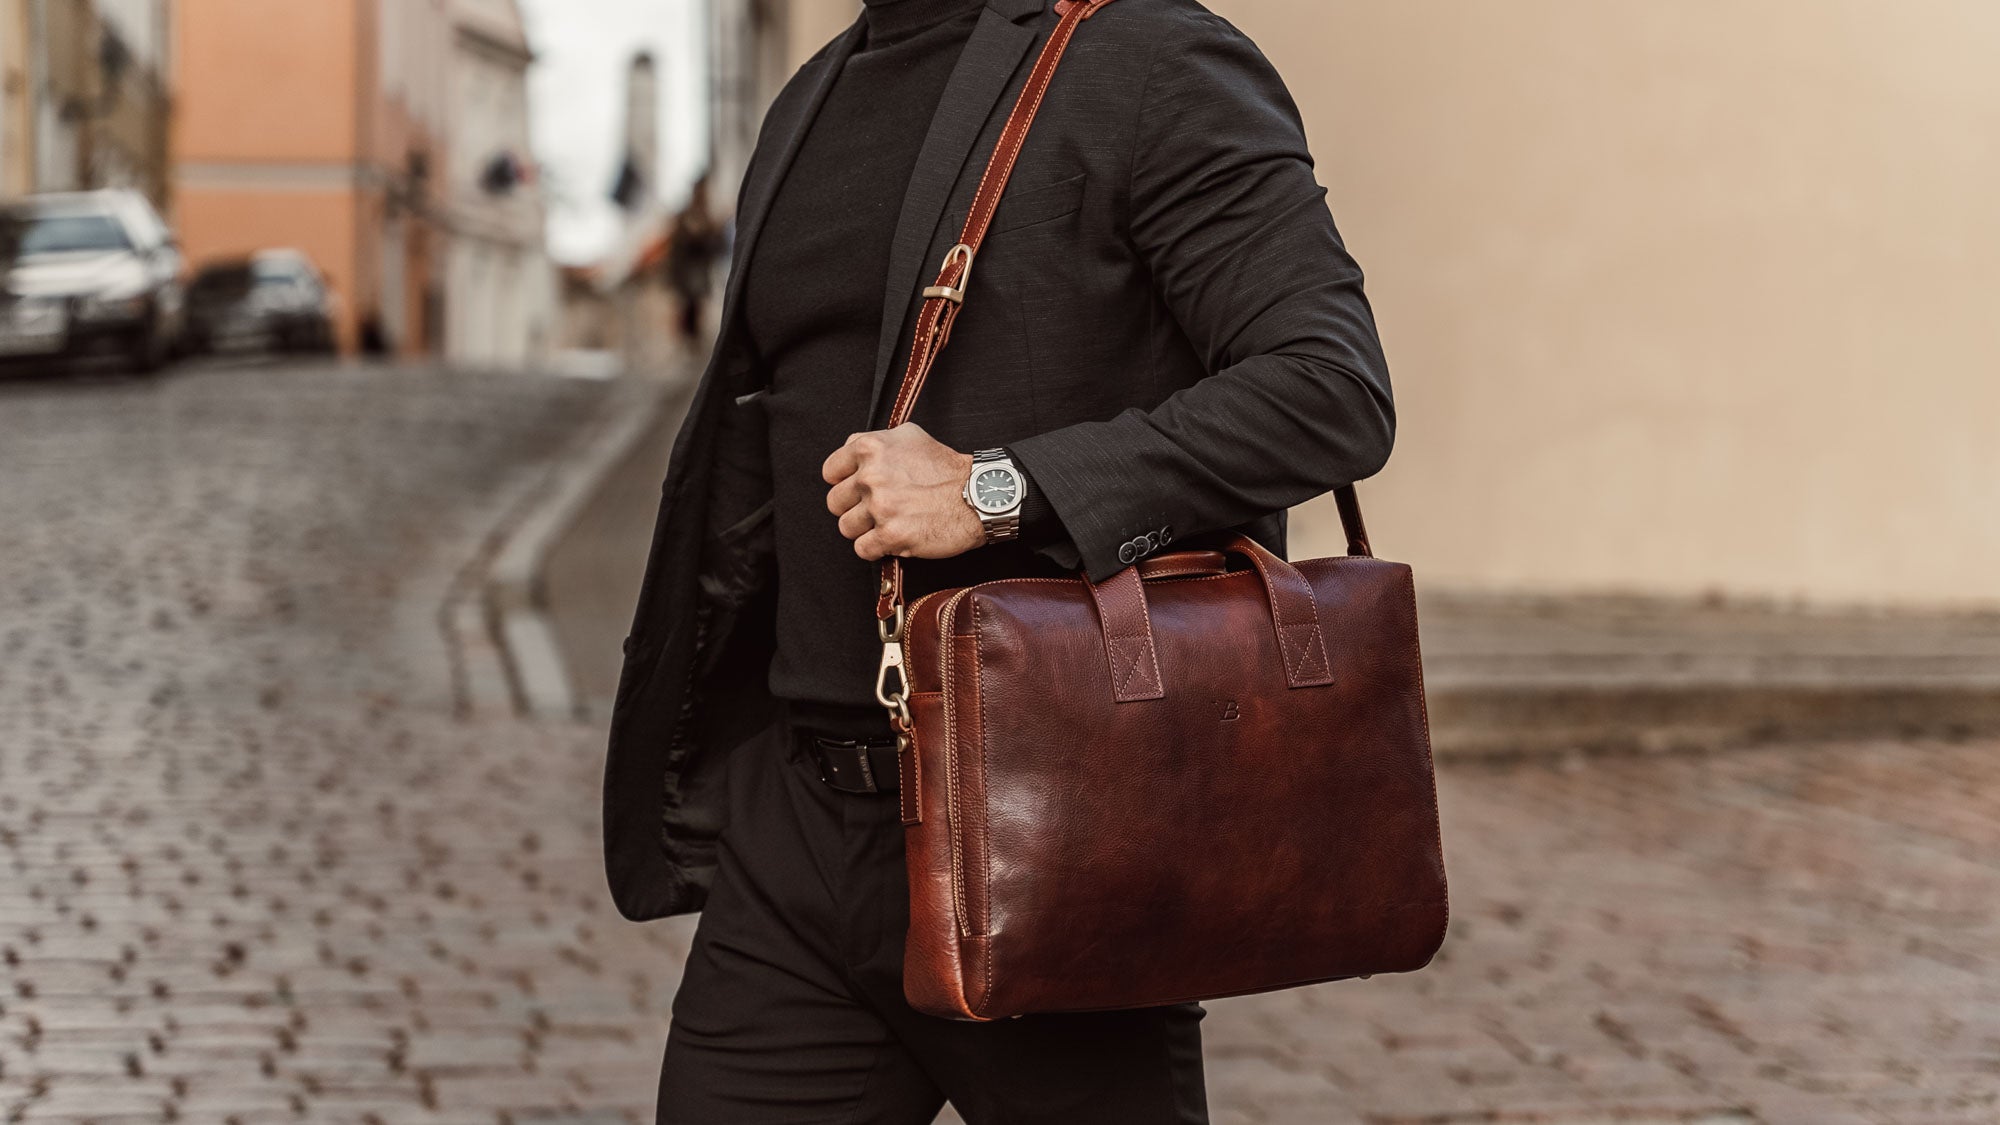 Classic Leather Messenger Briefcase with Locking Compartment - Von Baer